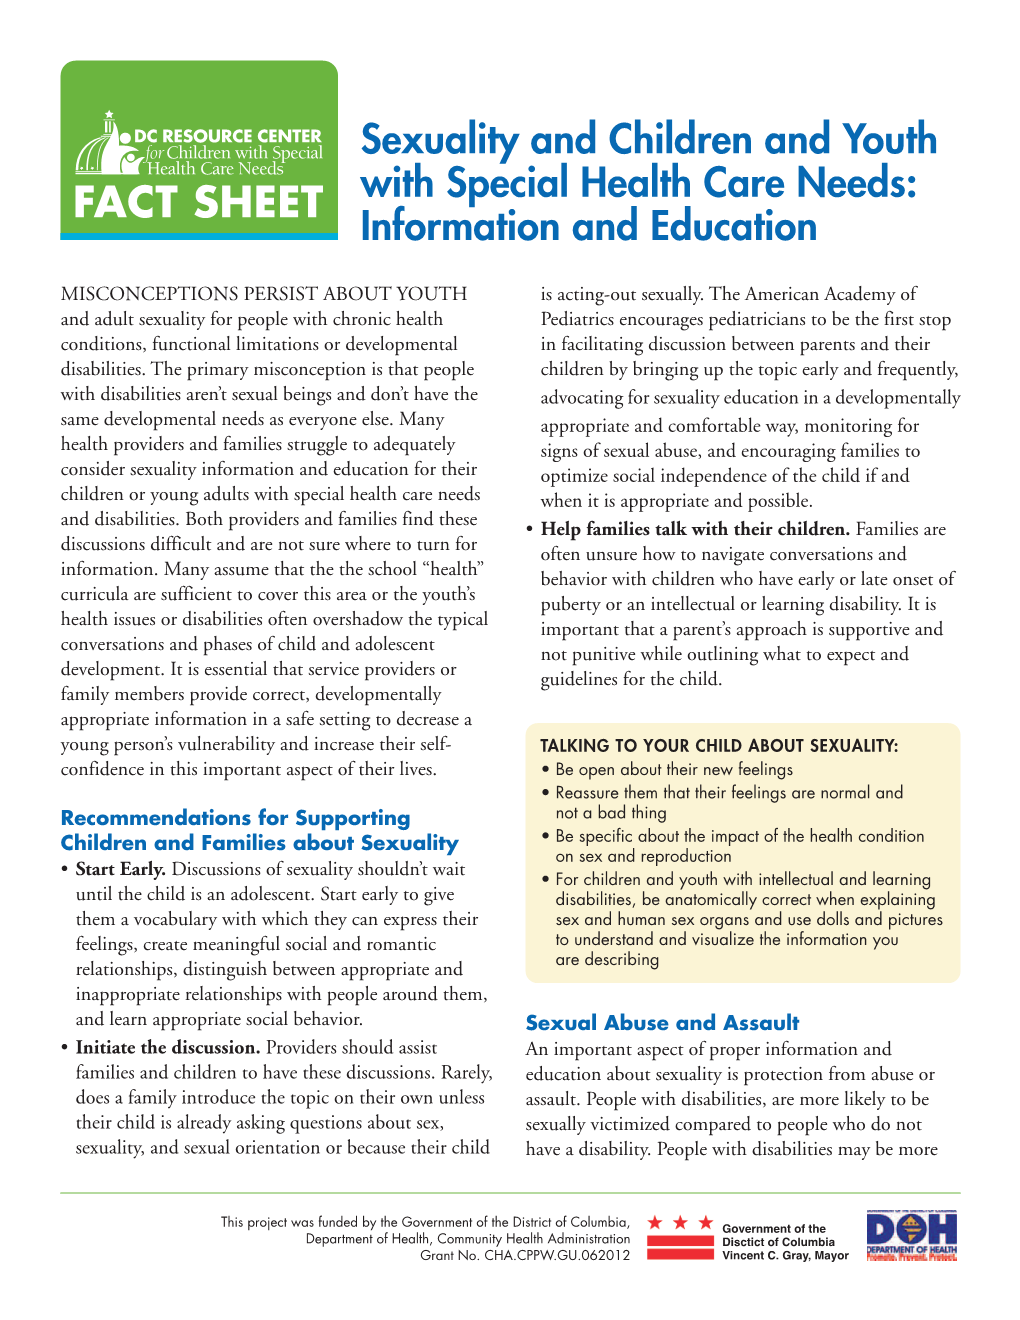 Sexuality and Children and Youth with Special Health Care Needs: Information and Education